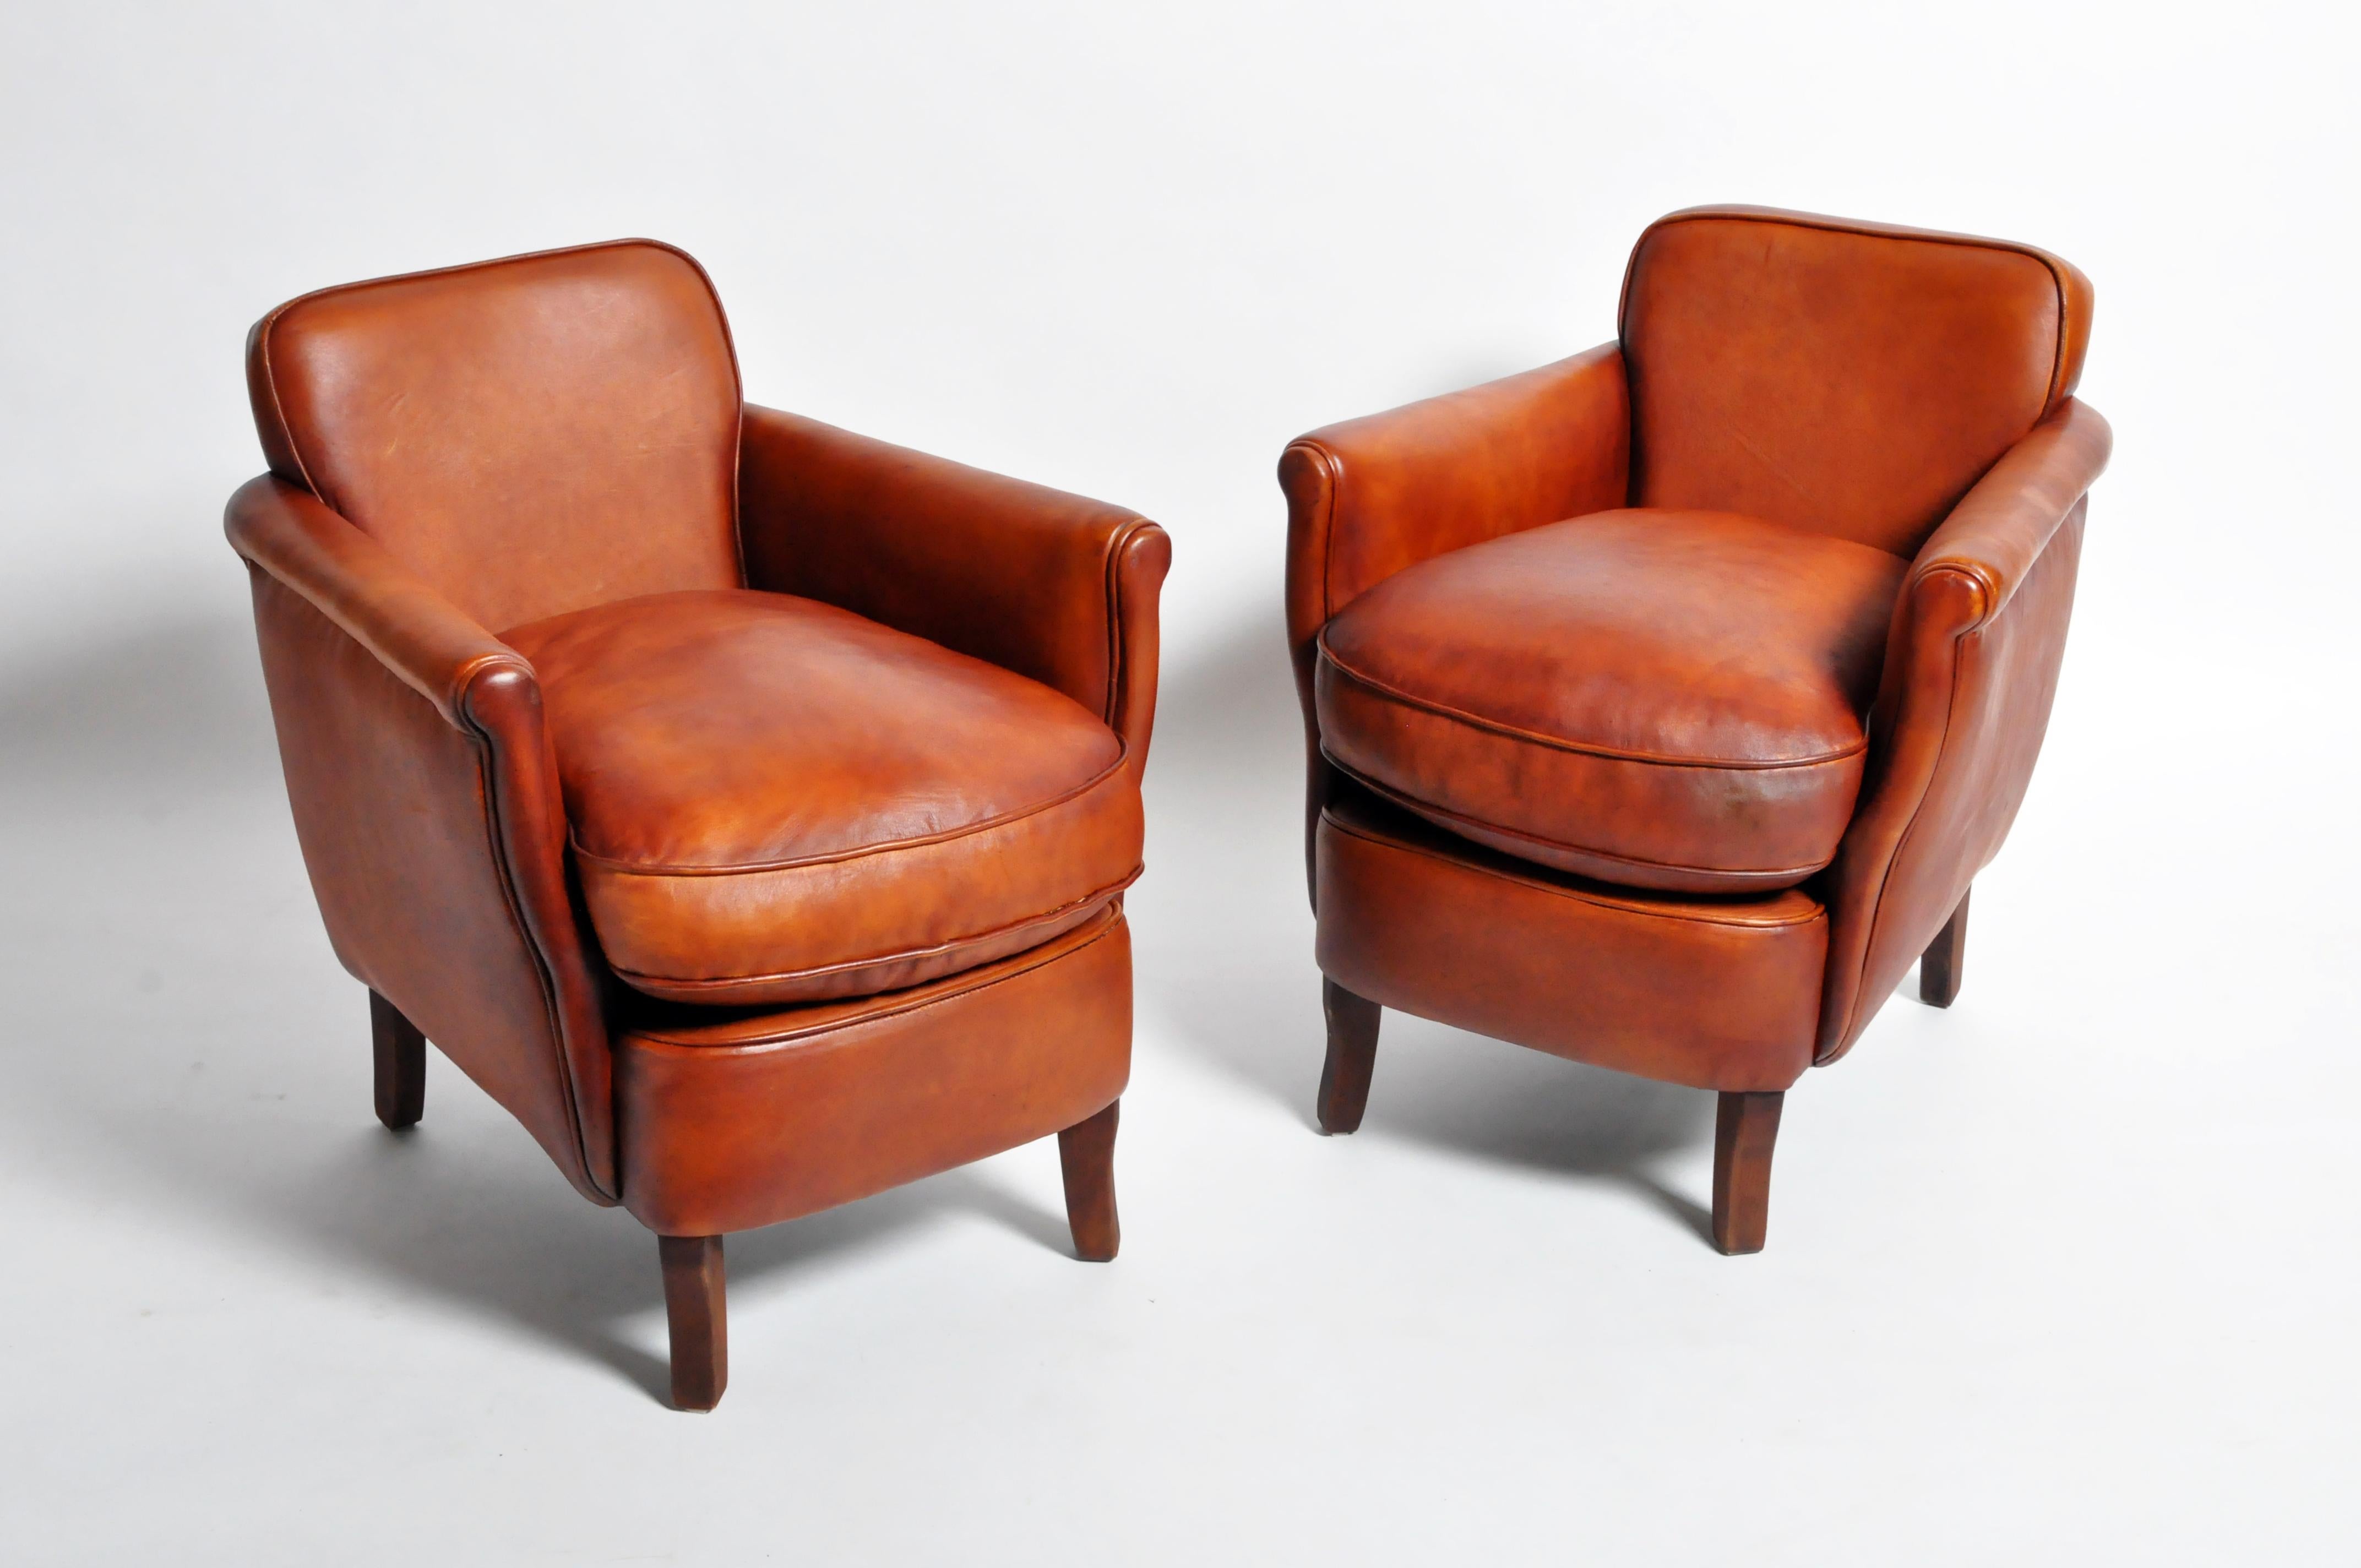 This newly made pair of armchairs are from France and made from leather and wood. The chairs feature black piping and are comfortable and sturdy, ready for daily use.